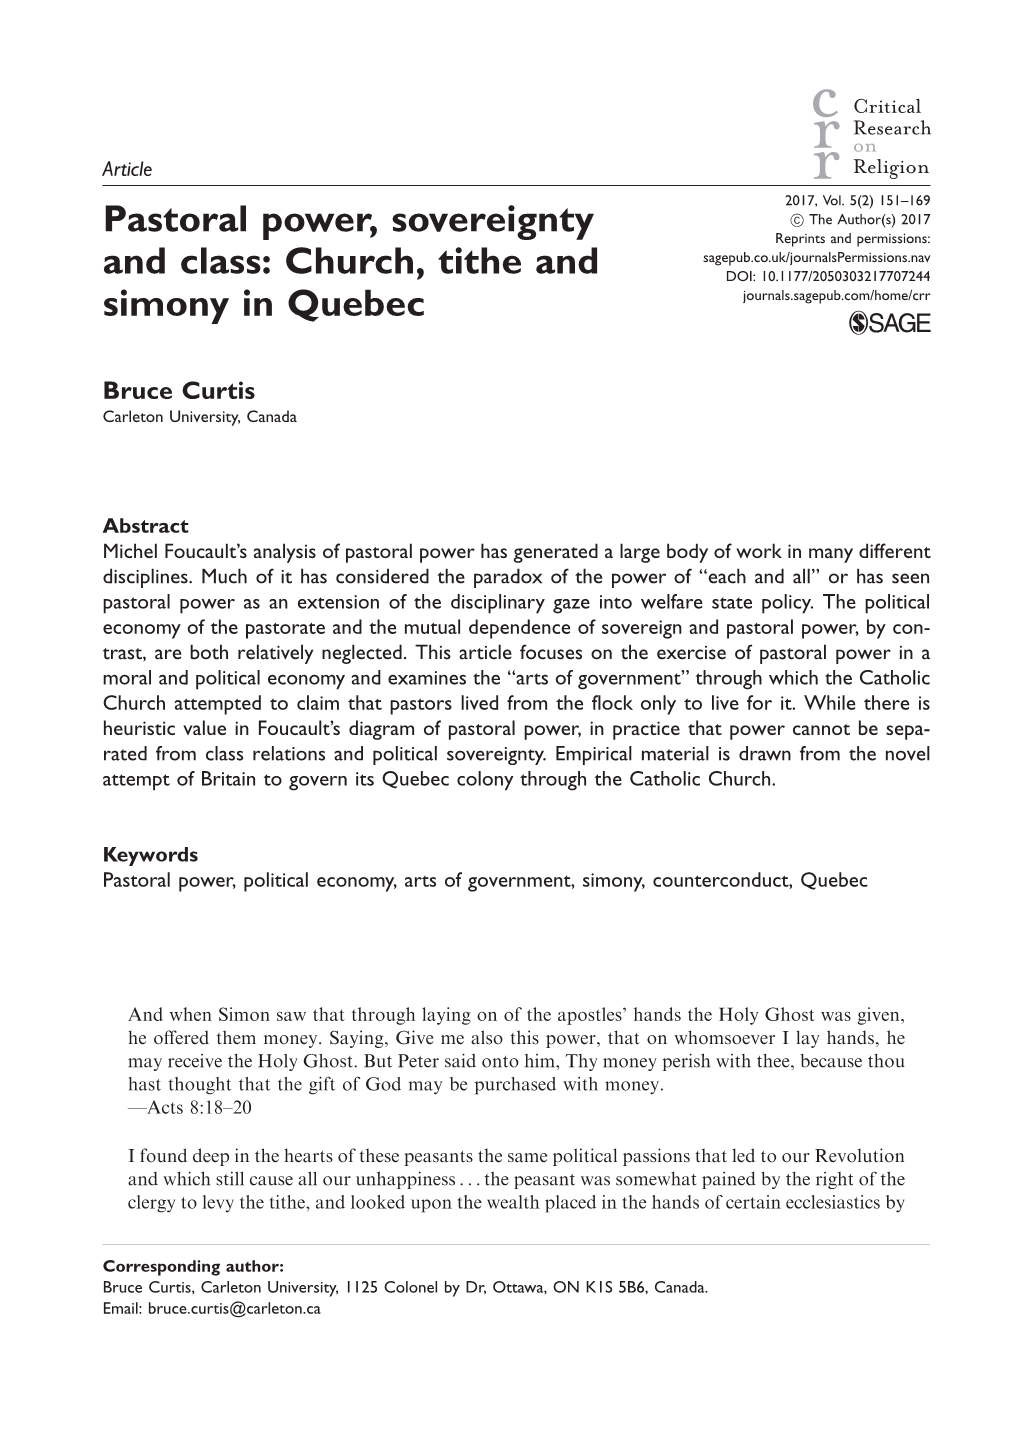 Pastoral Power, Sovereignty and Class: Church, Tithe and Simony In